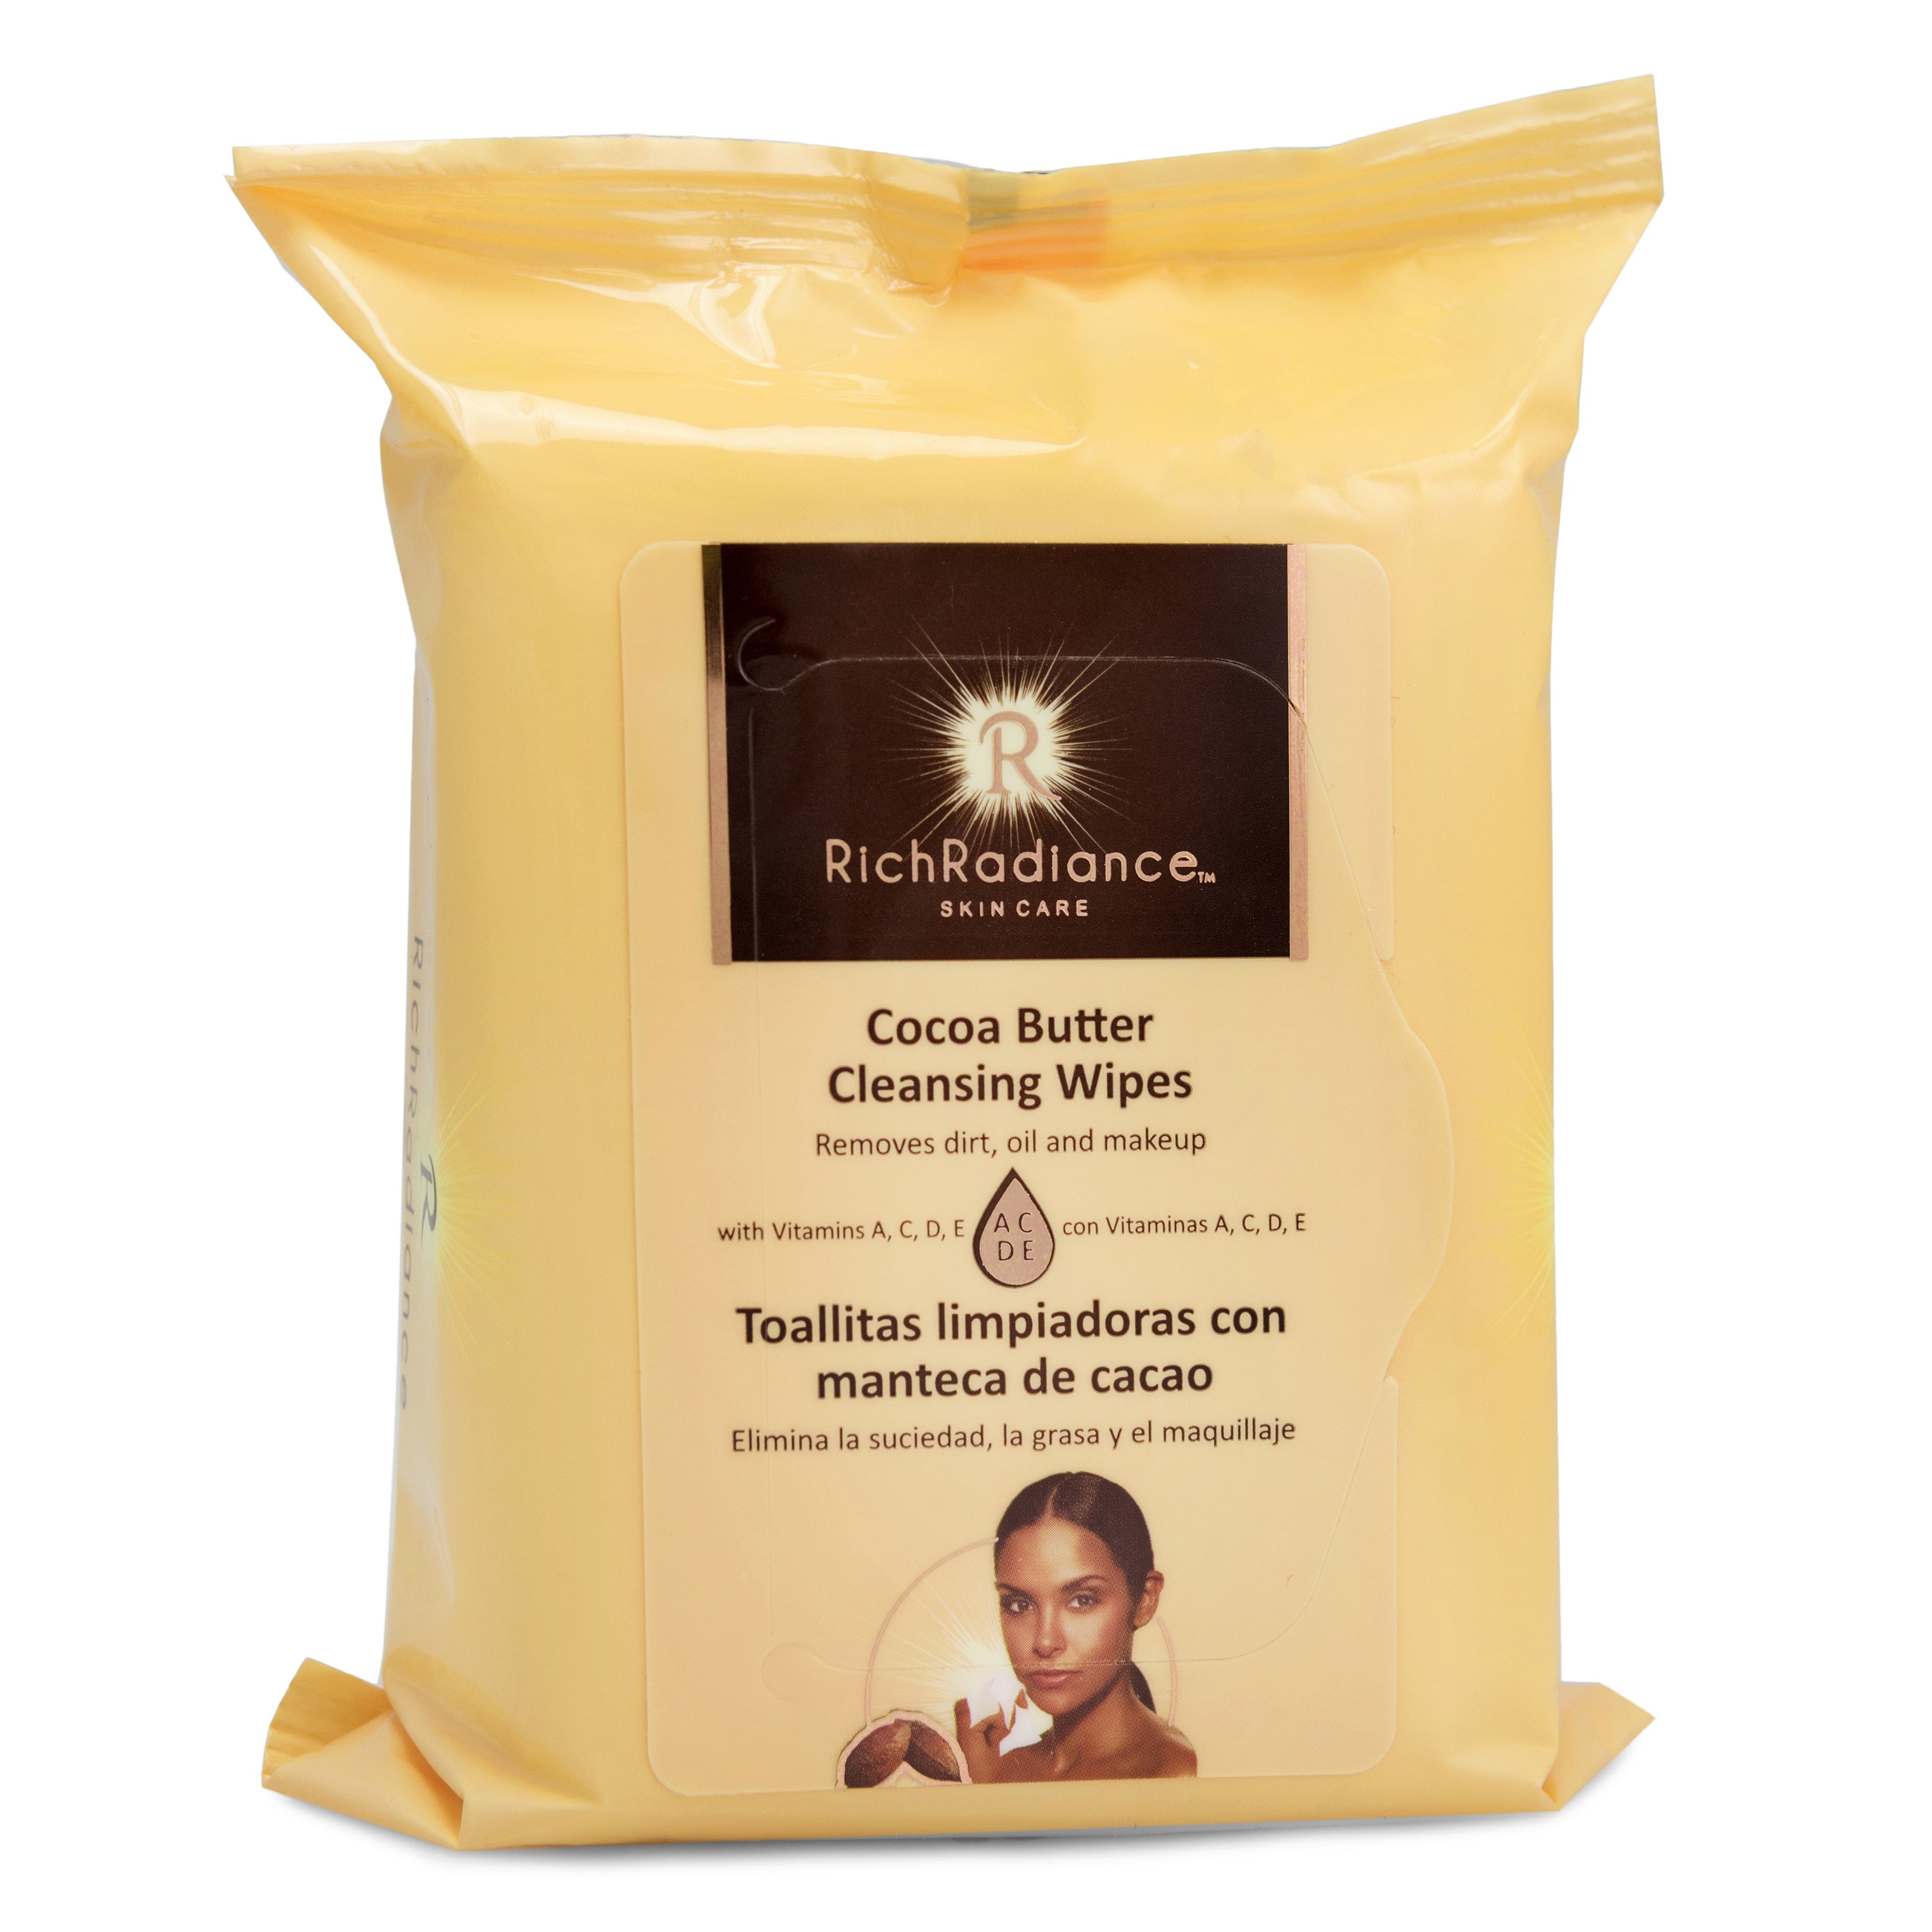 Cocoa Butter Makeup Cleansing Wipes